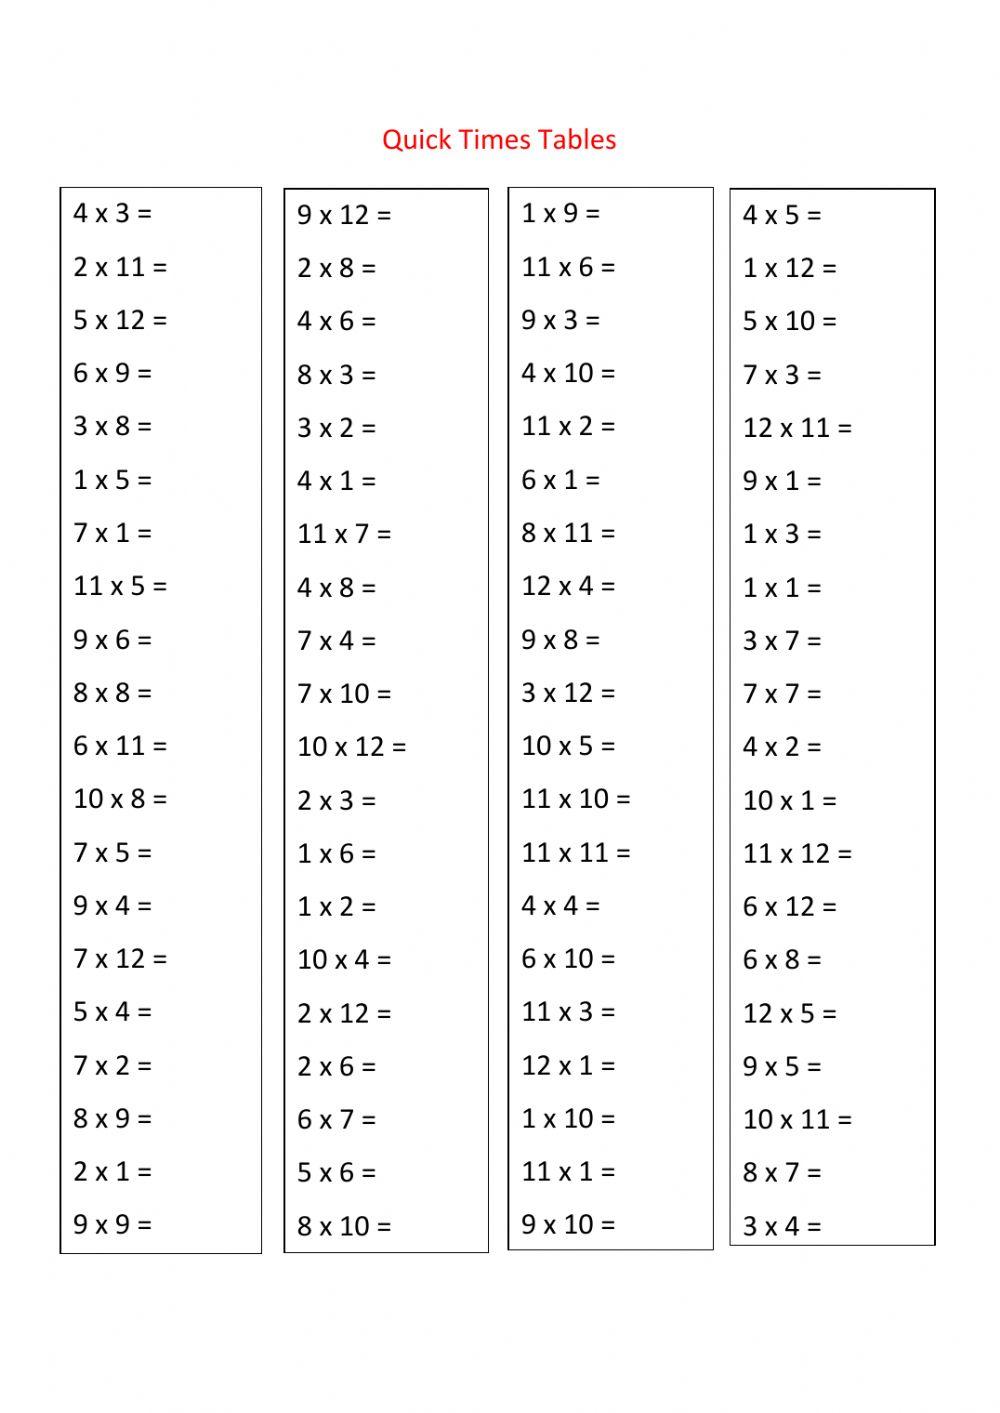 Quick Times Tables Challenge